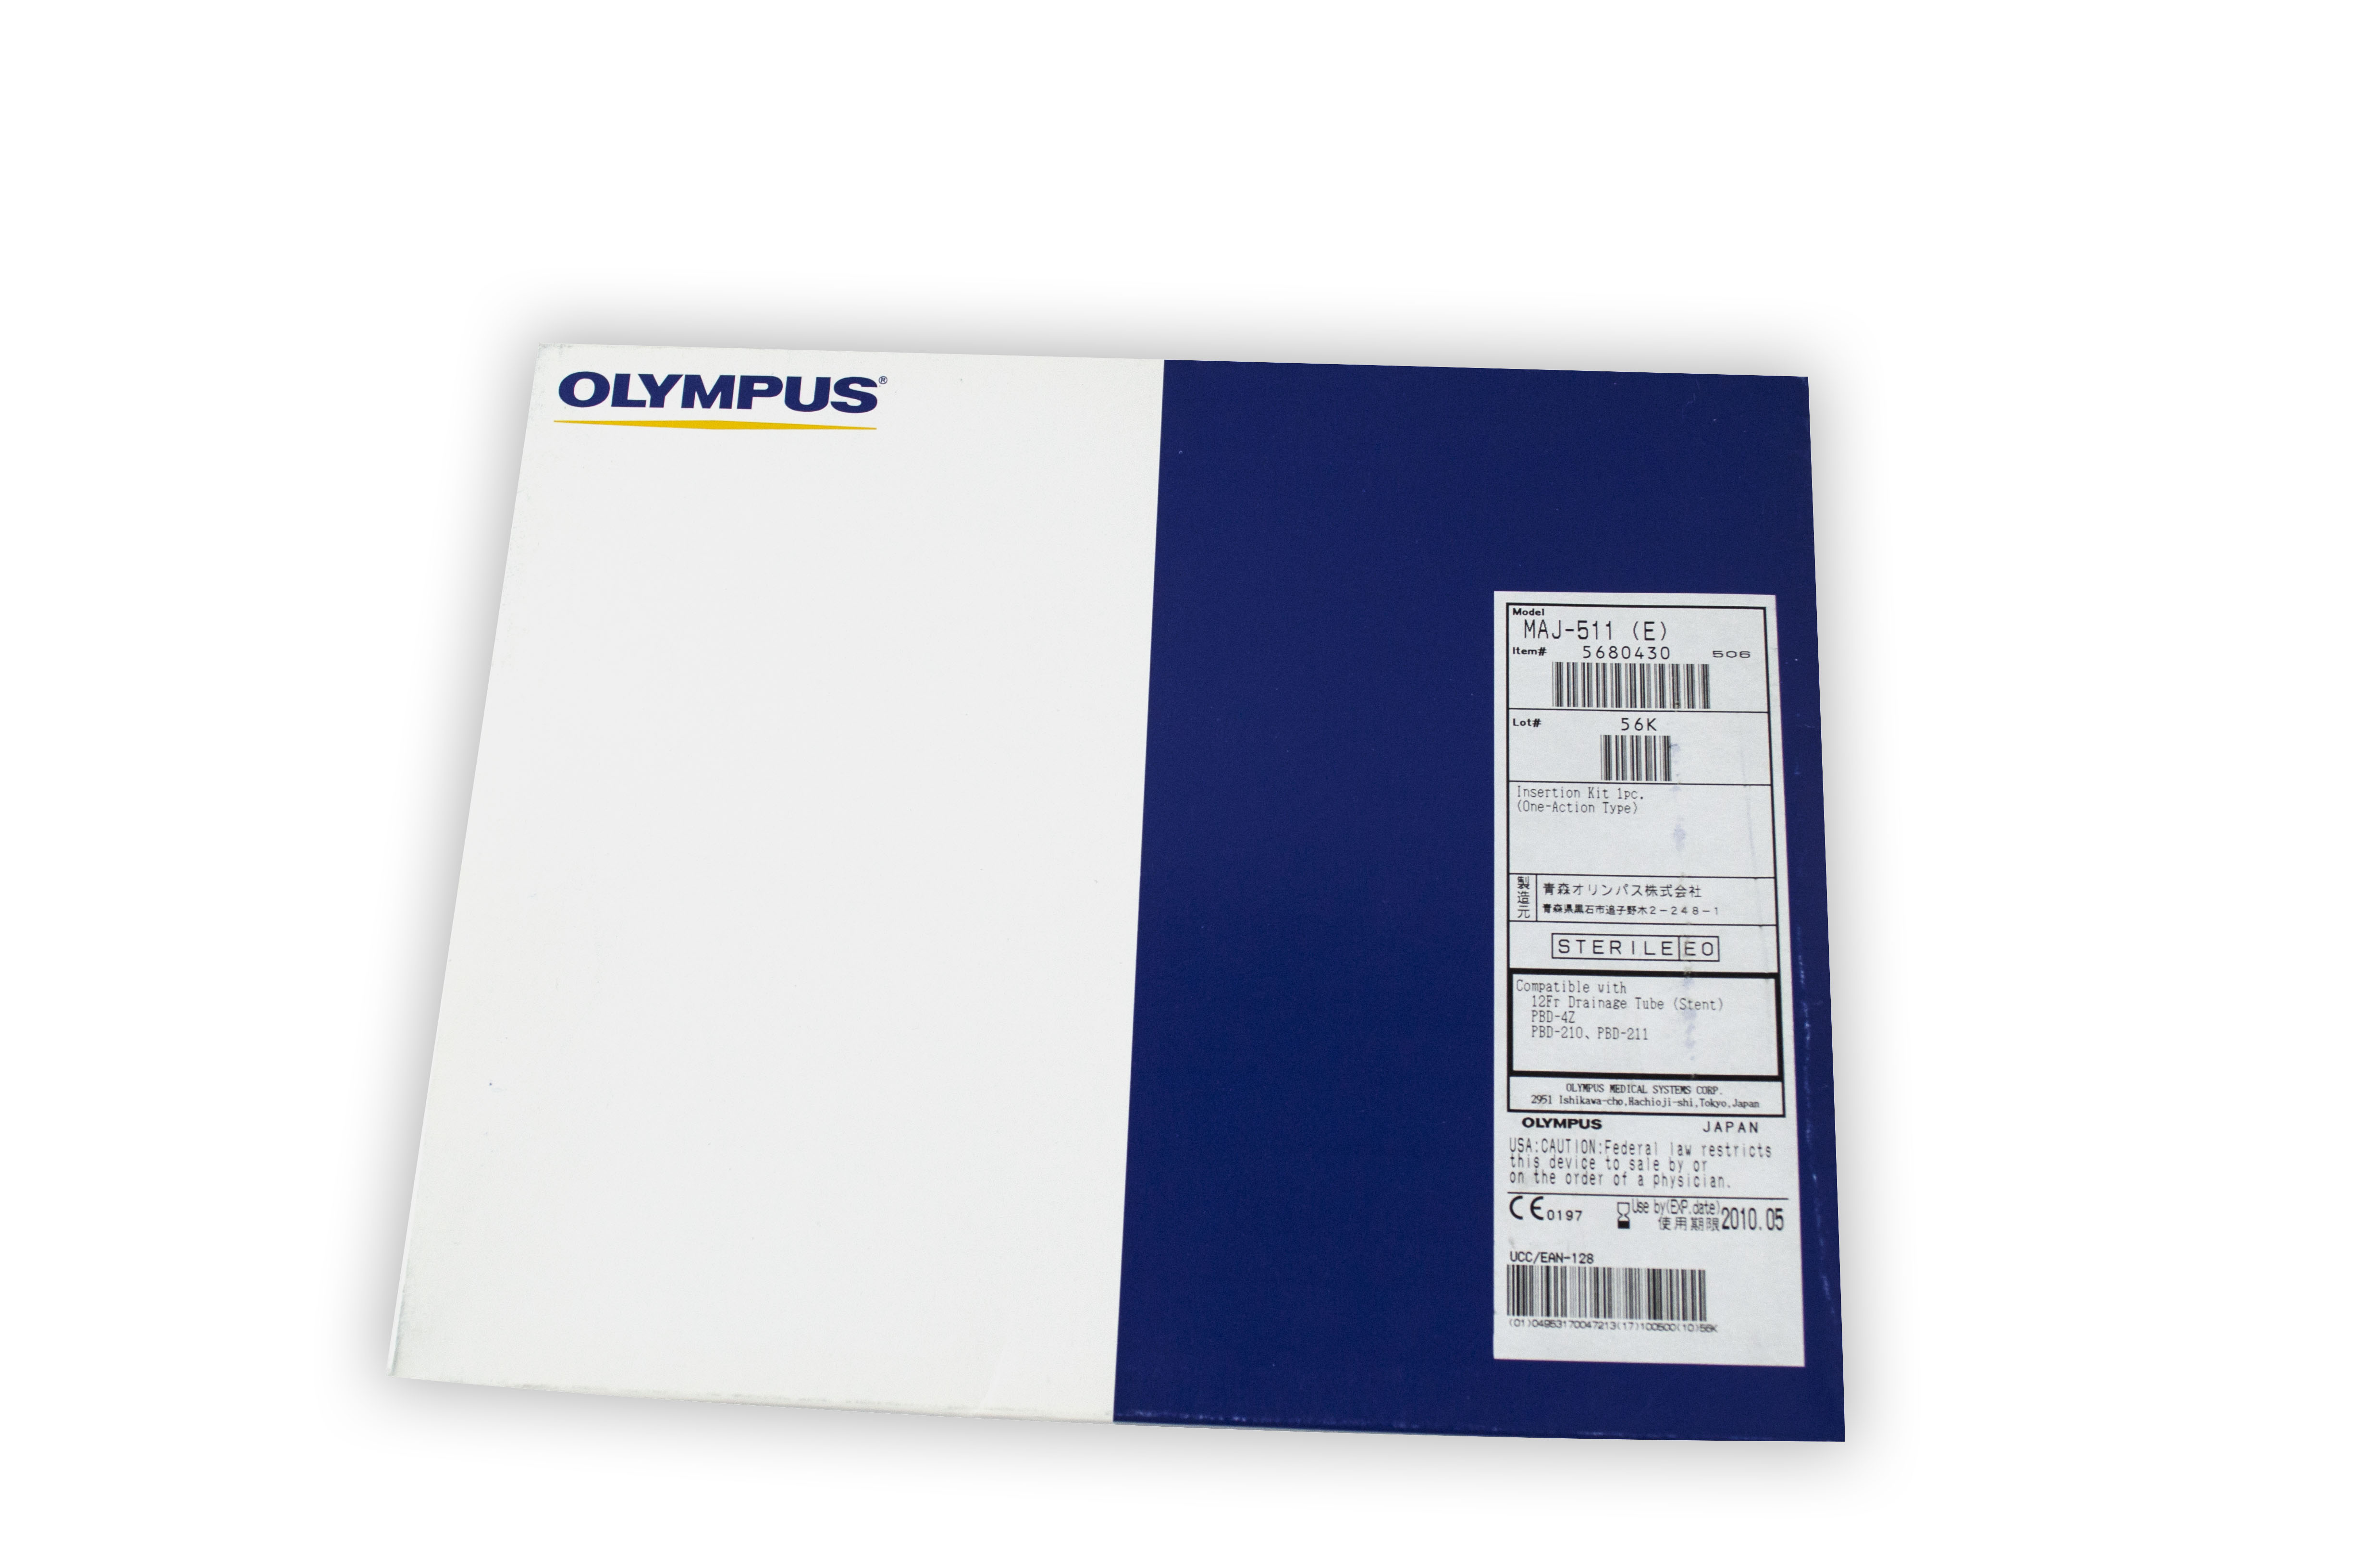 [Out-of-Date] Olympus Disposable Accessory - MAJ-511